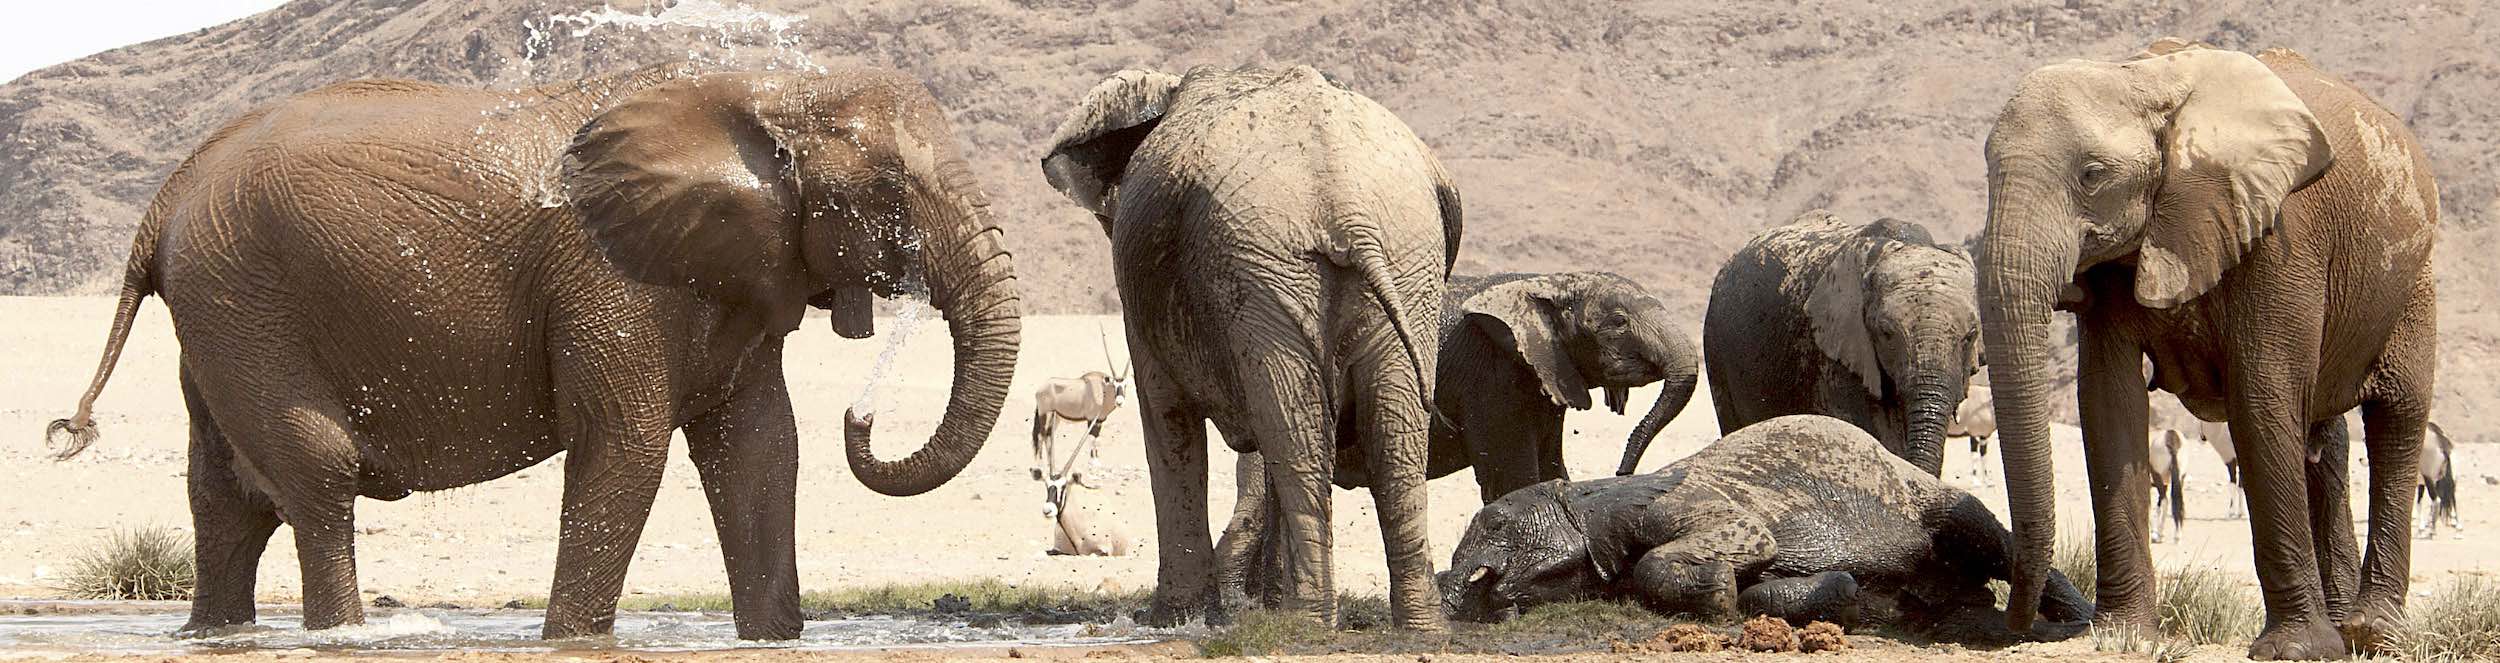 Elephants having a shower and bath in the desert.